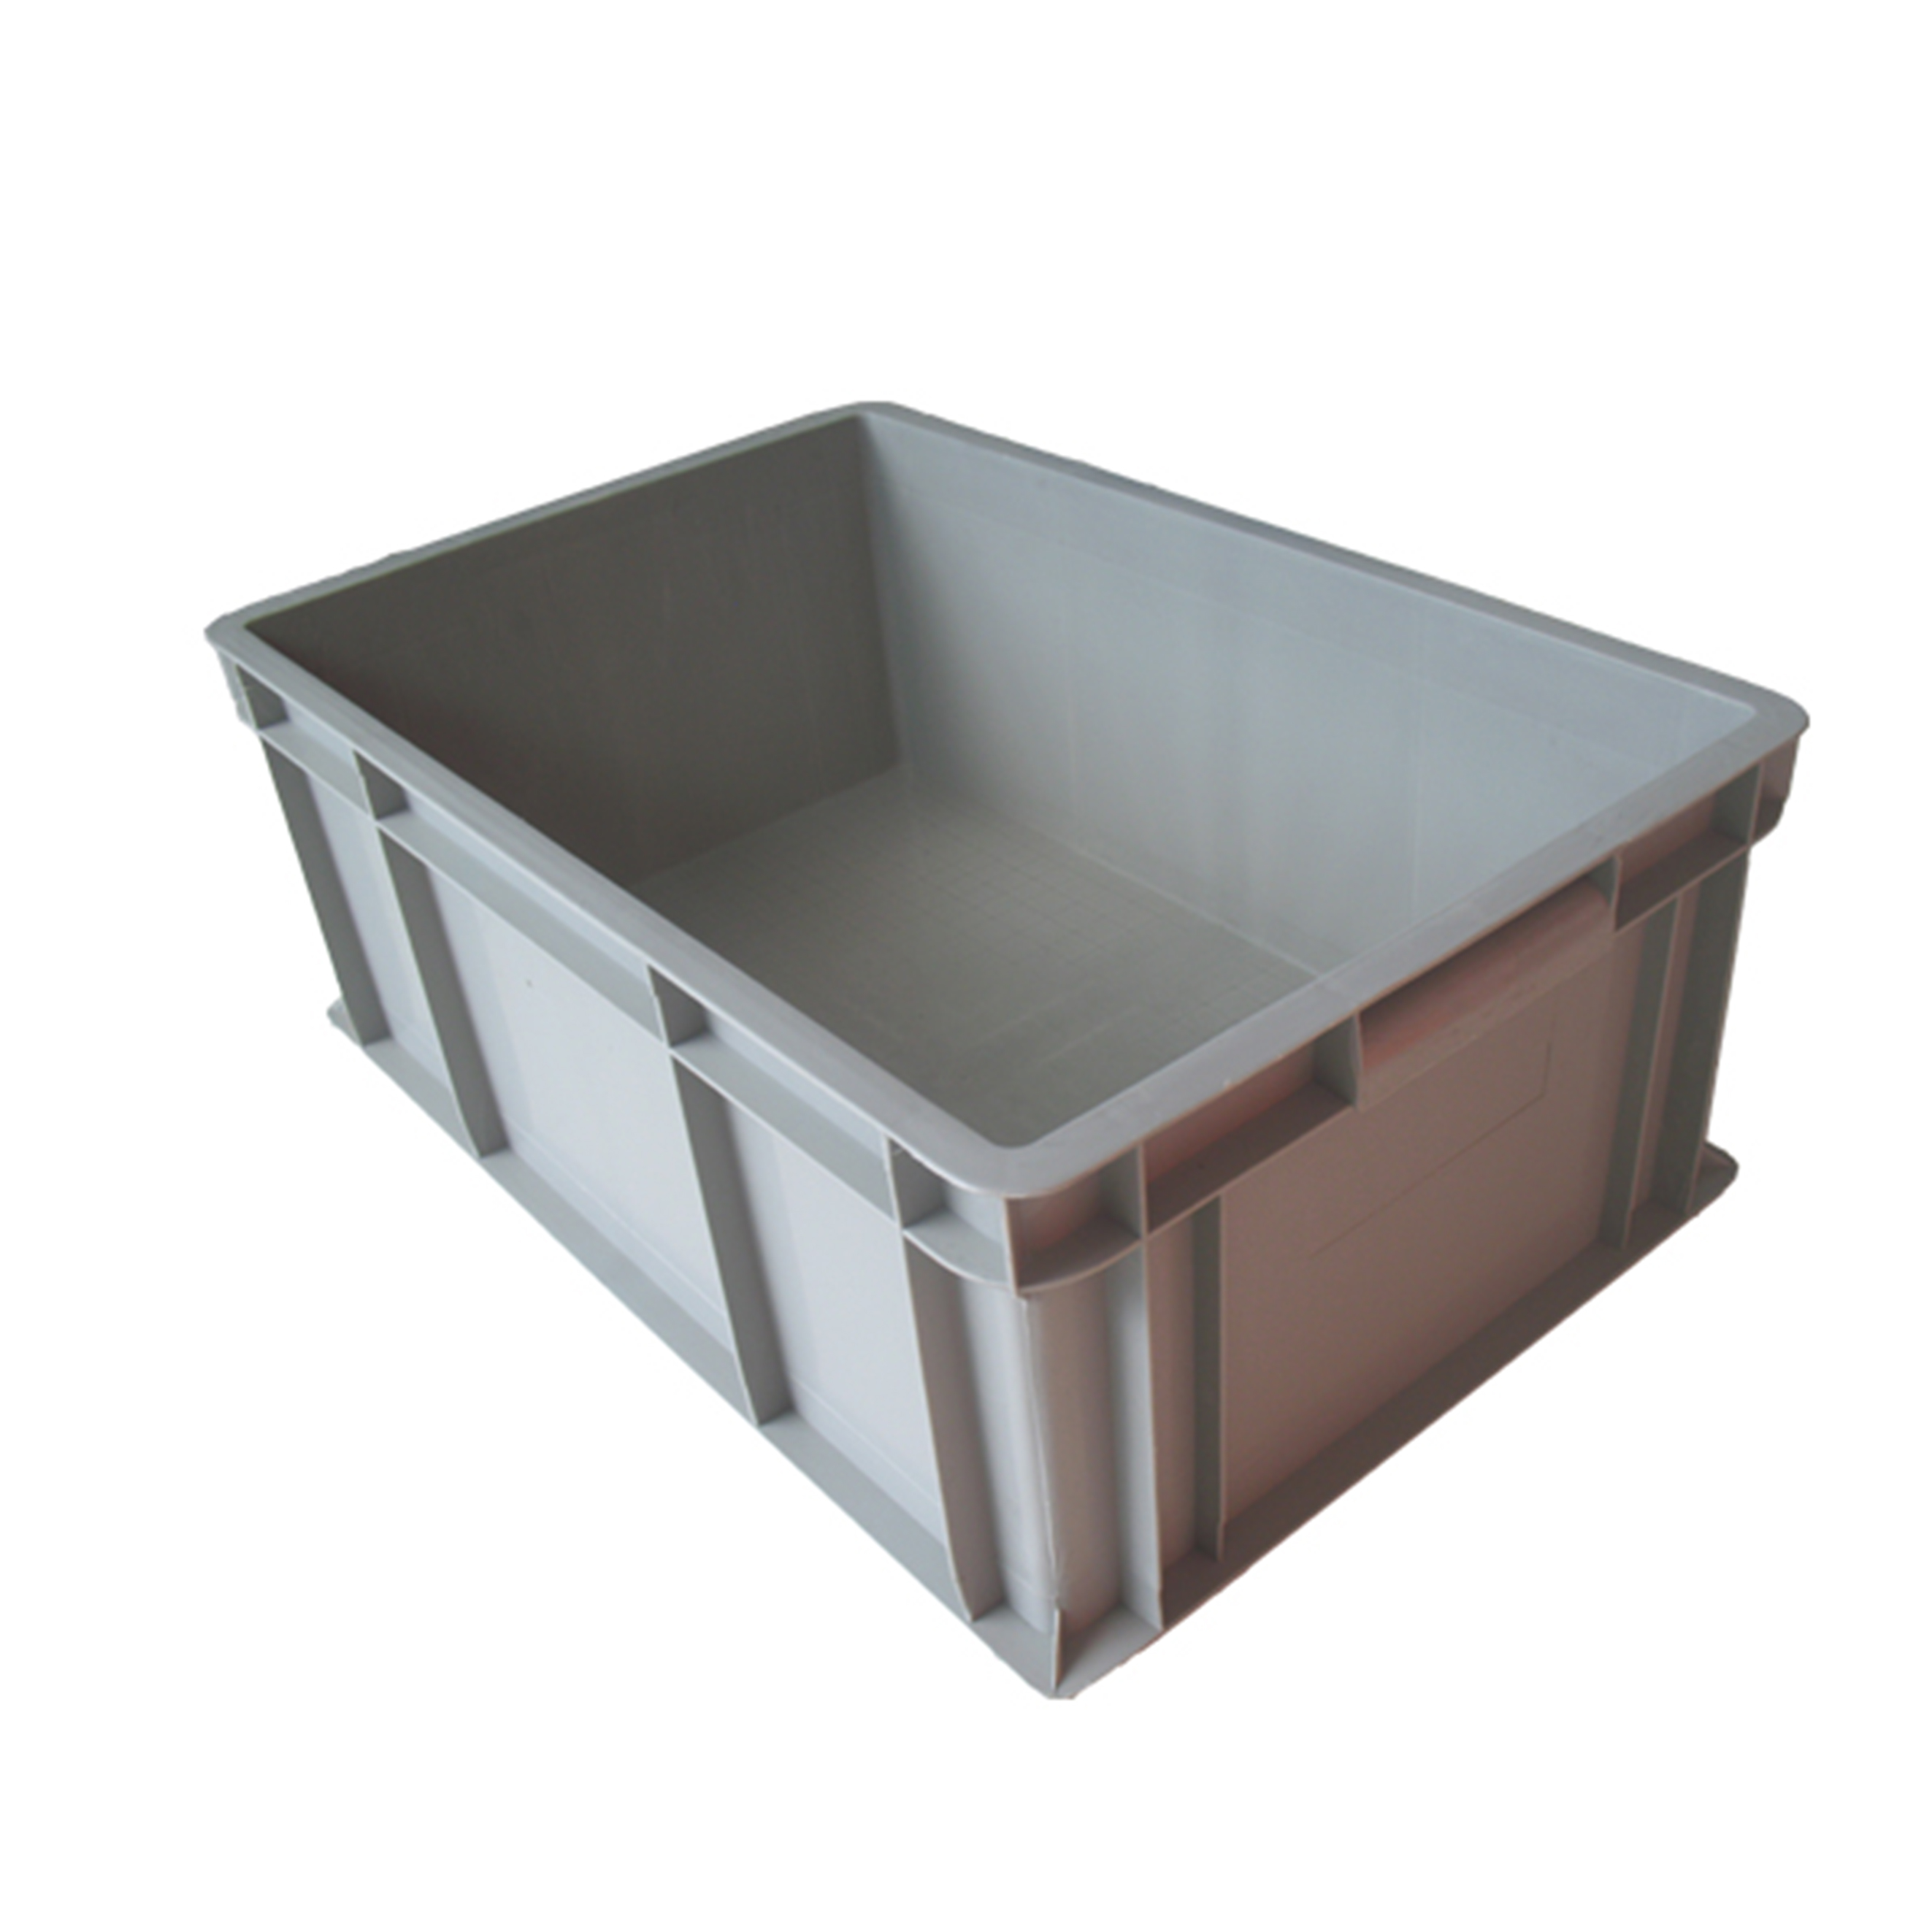 wholesale heavy duty plastic storage totes, plastic containers